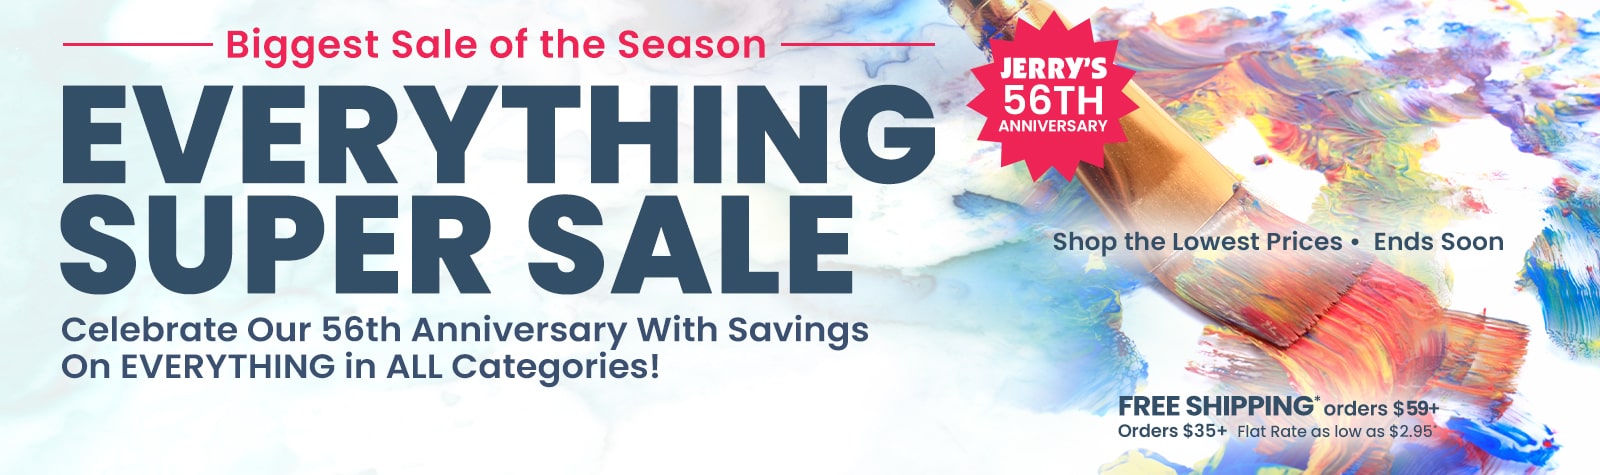 Jerry's 56th Anniversary Everything Sale - Up to 90% Off List Price